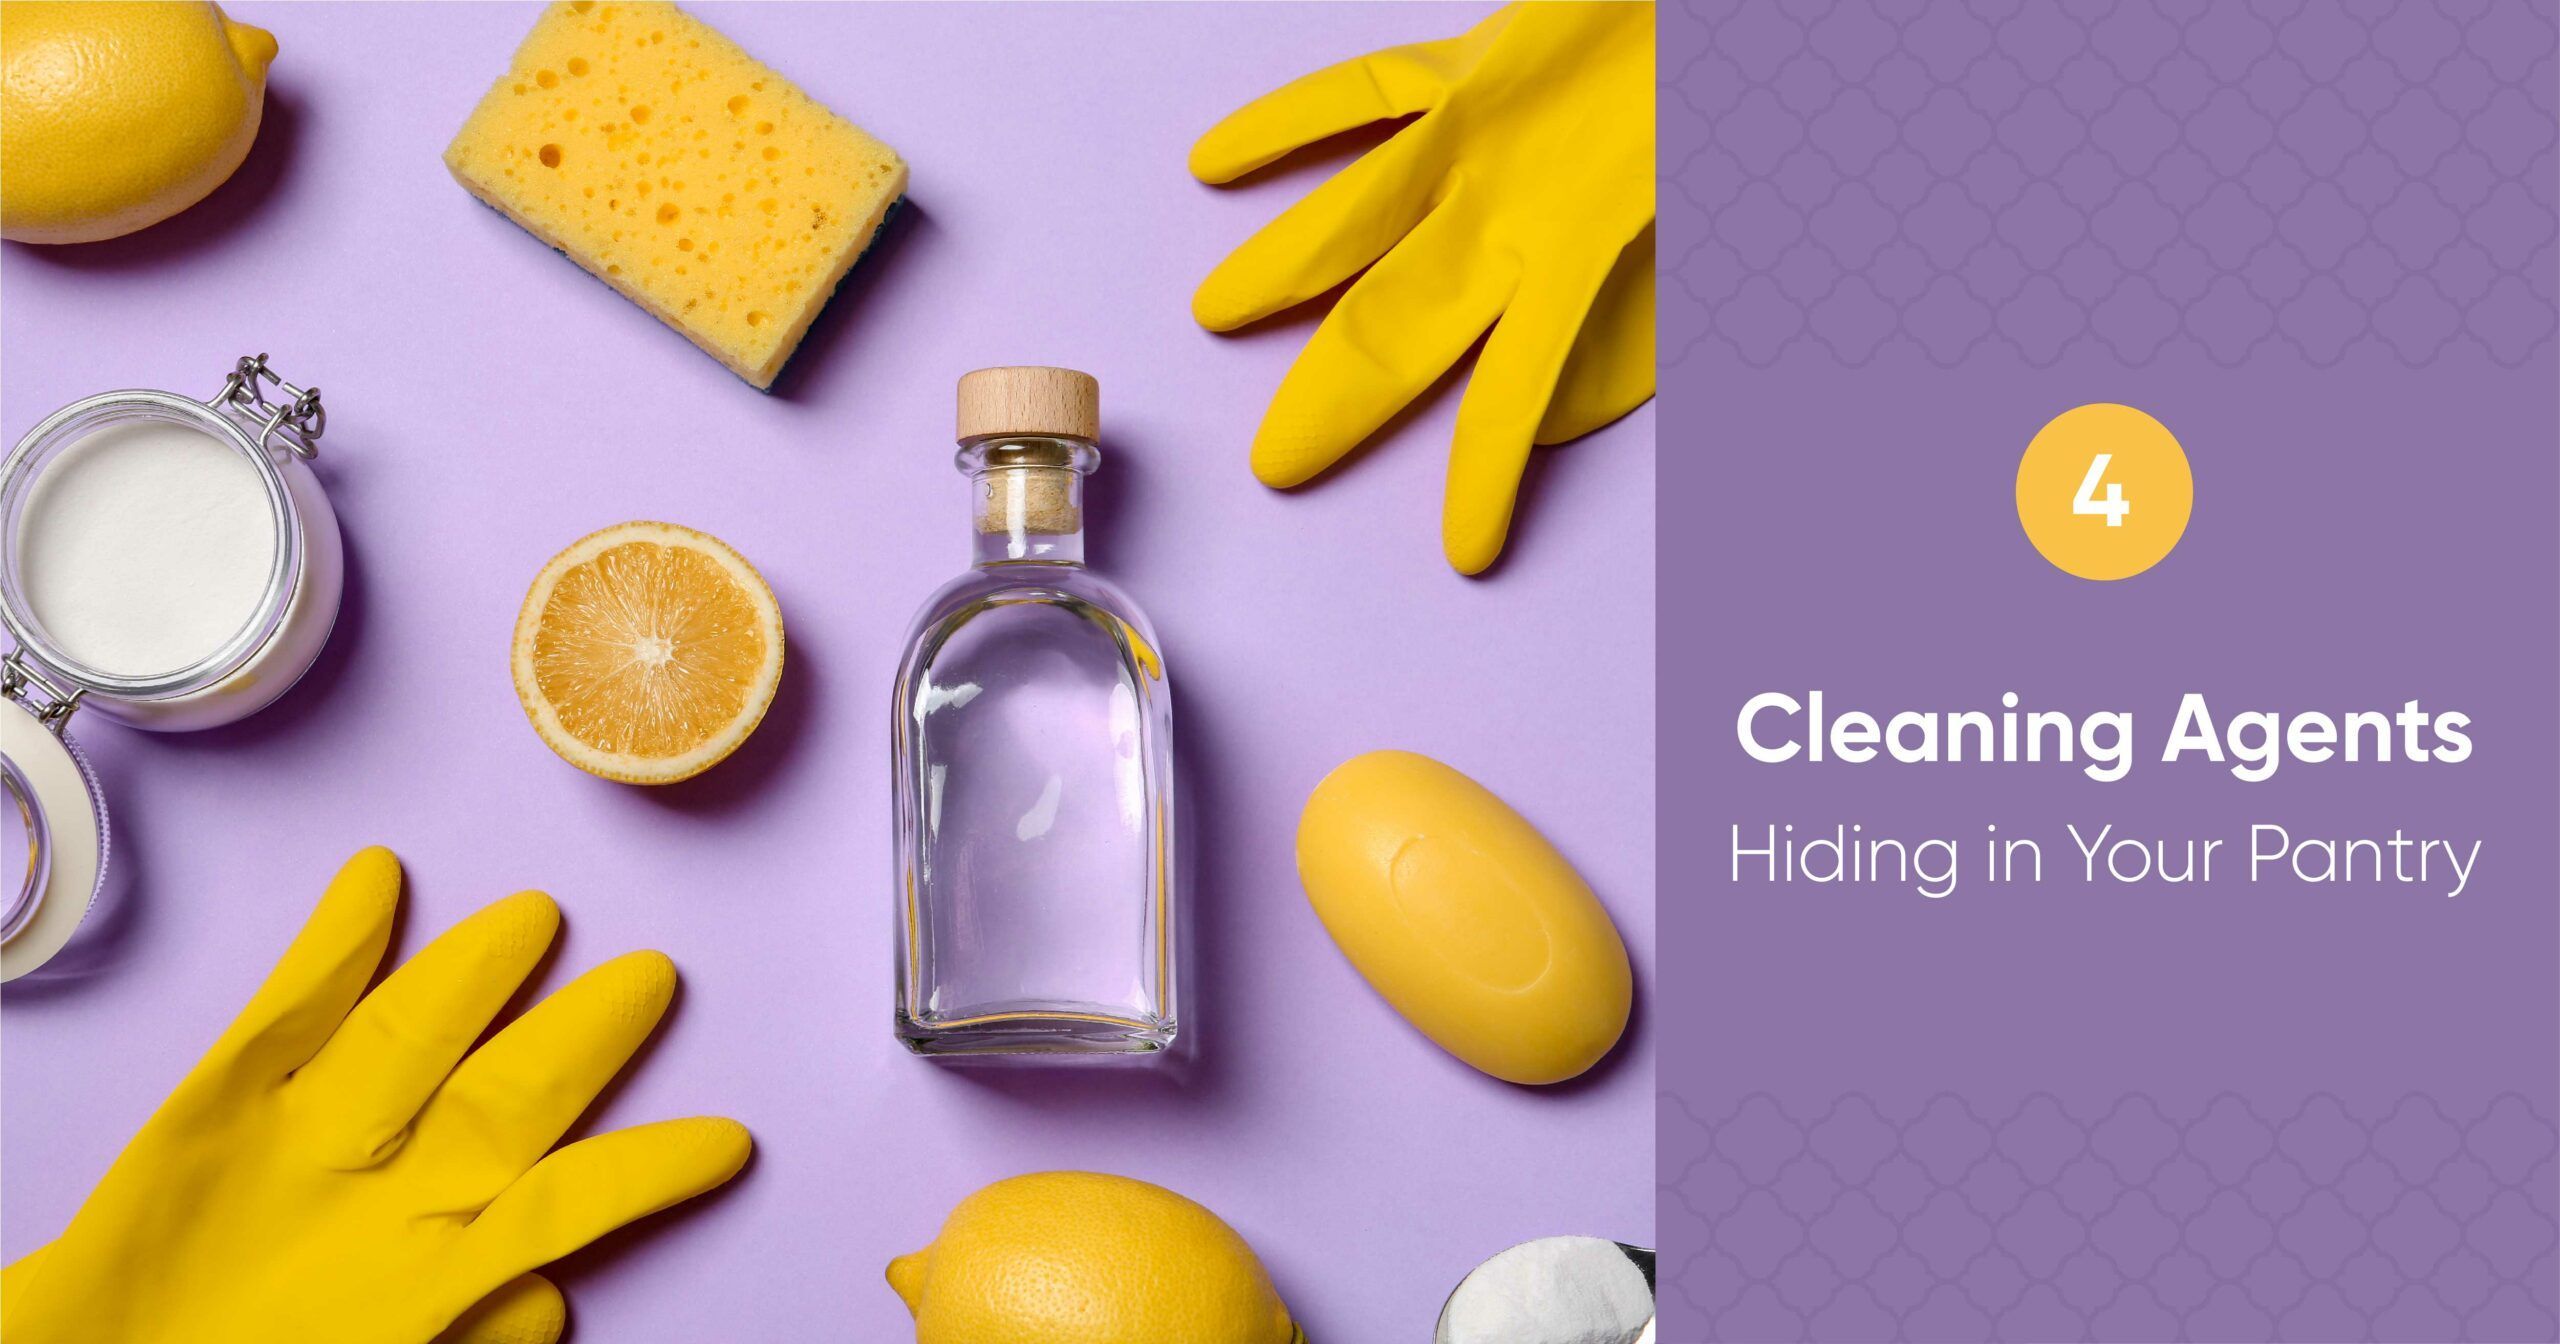 Keep it Simple With These Cleaning Solutions!